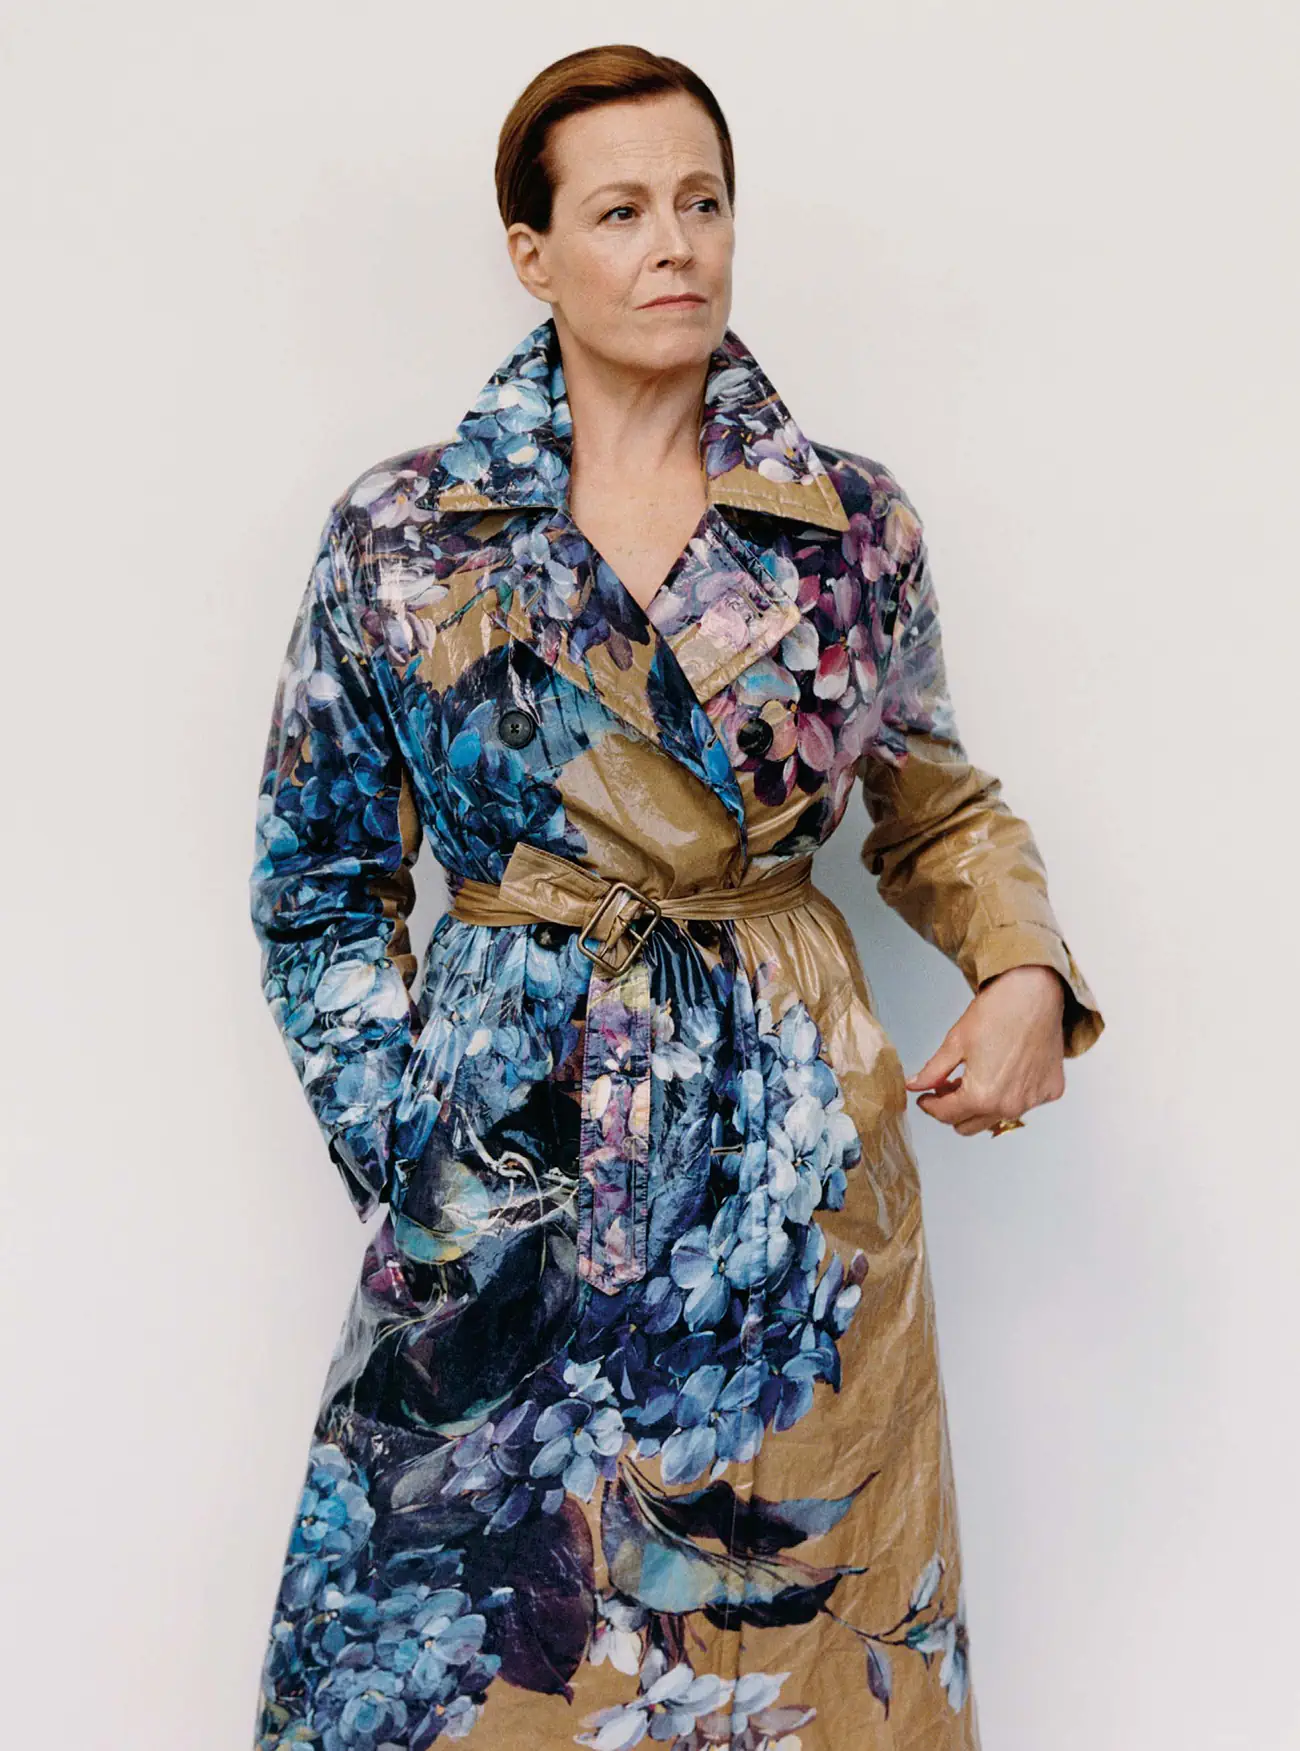 Sigourney Weaver covers The Sunday Times Style July 23rd, 2023 by Bjorn Iooss